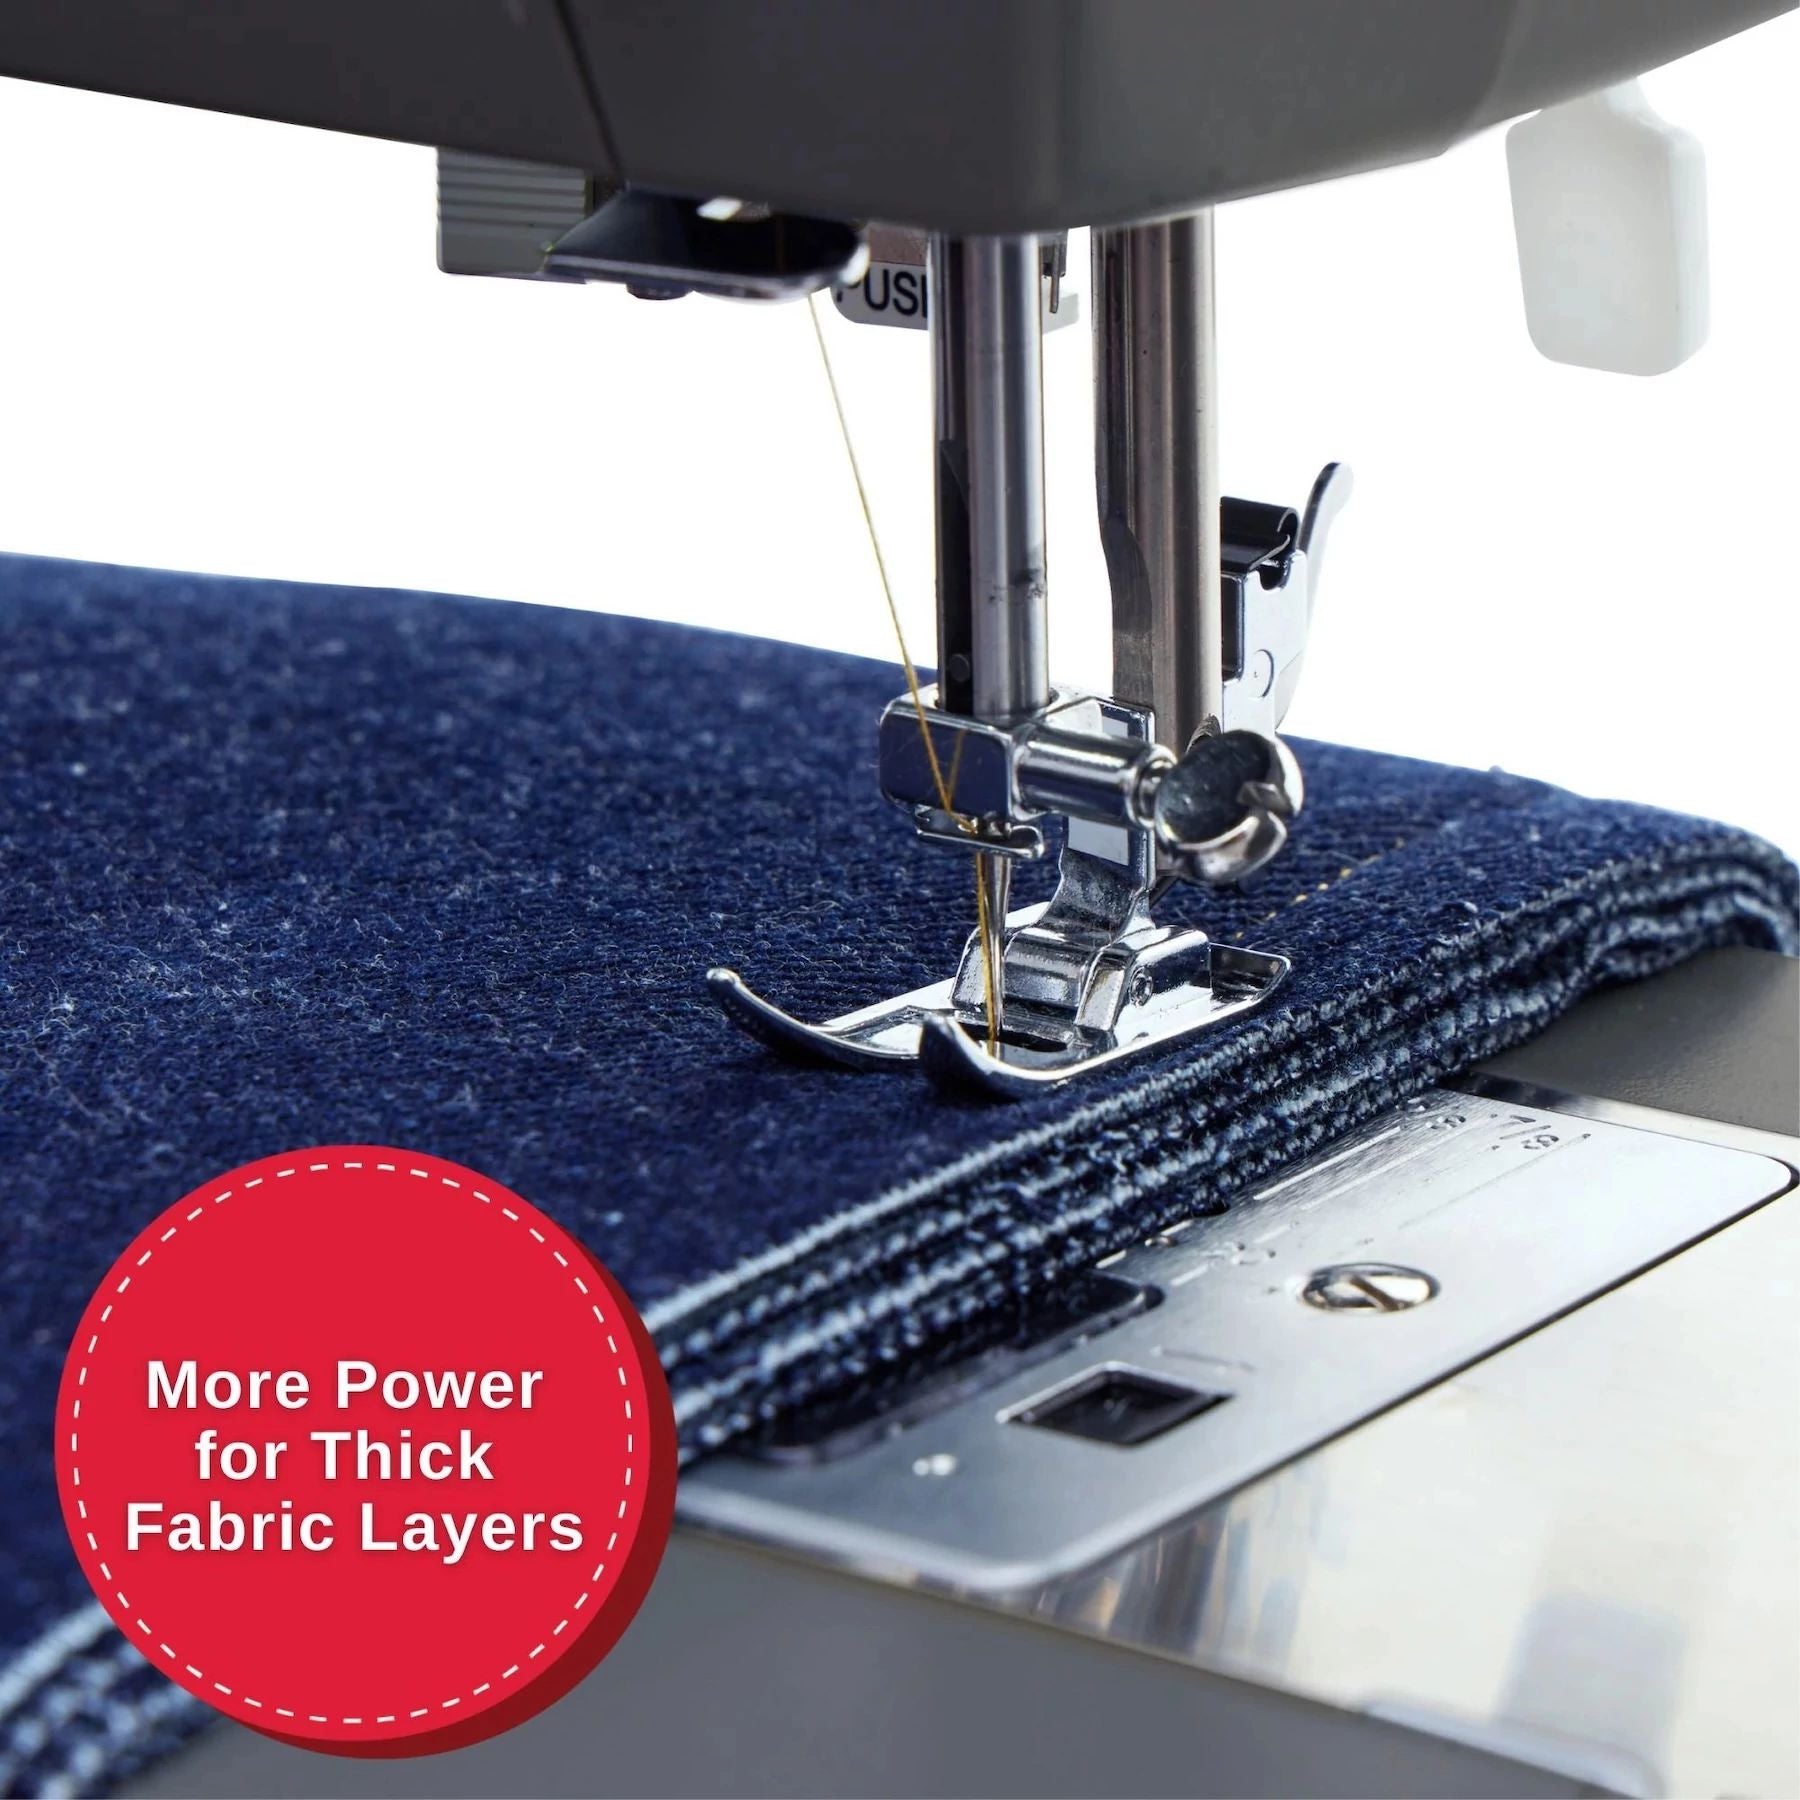 Close up of Singer Heavy Duty 4411 sewing machine sewing a thick blue fabric.